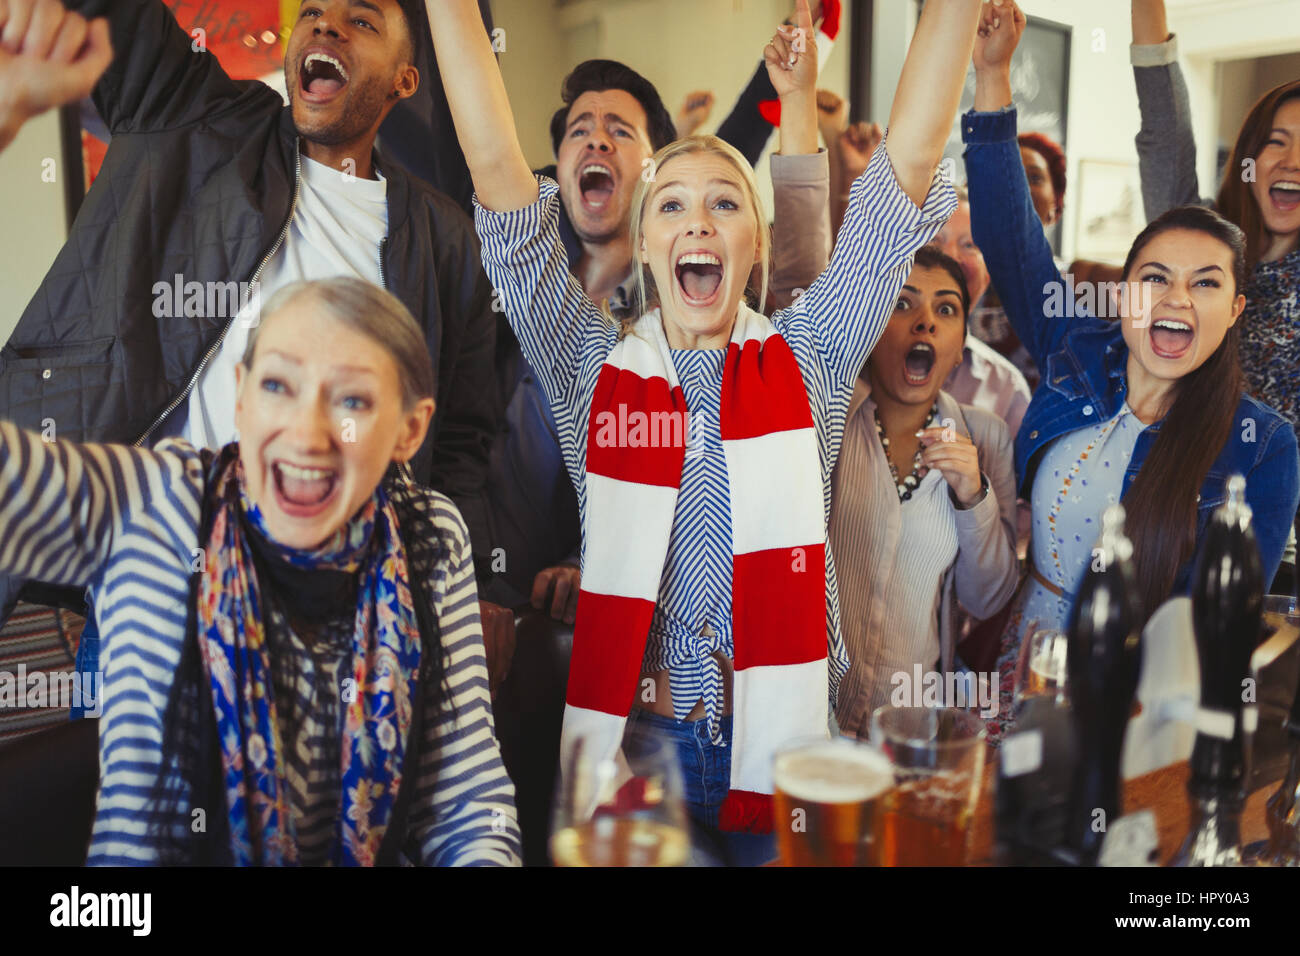 Enthusiastic sports fans cheering watching game in bar Stock Photo